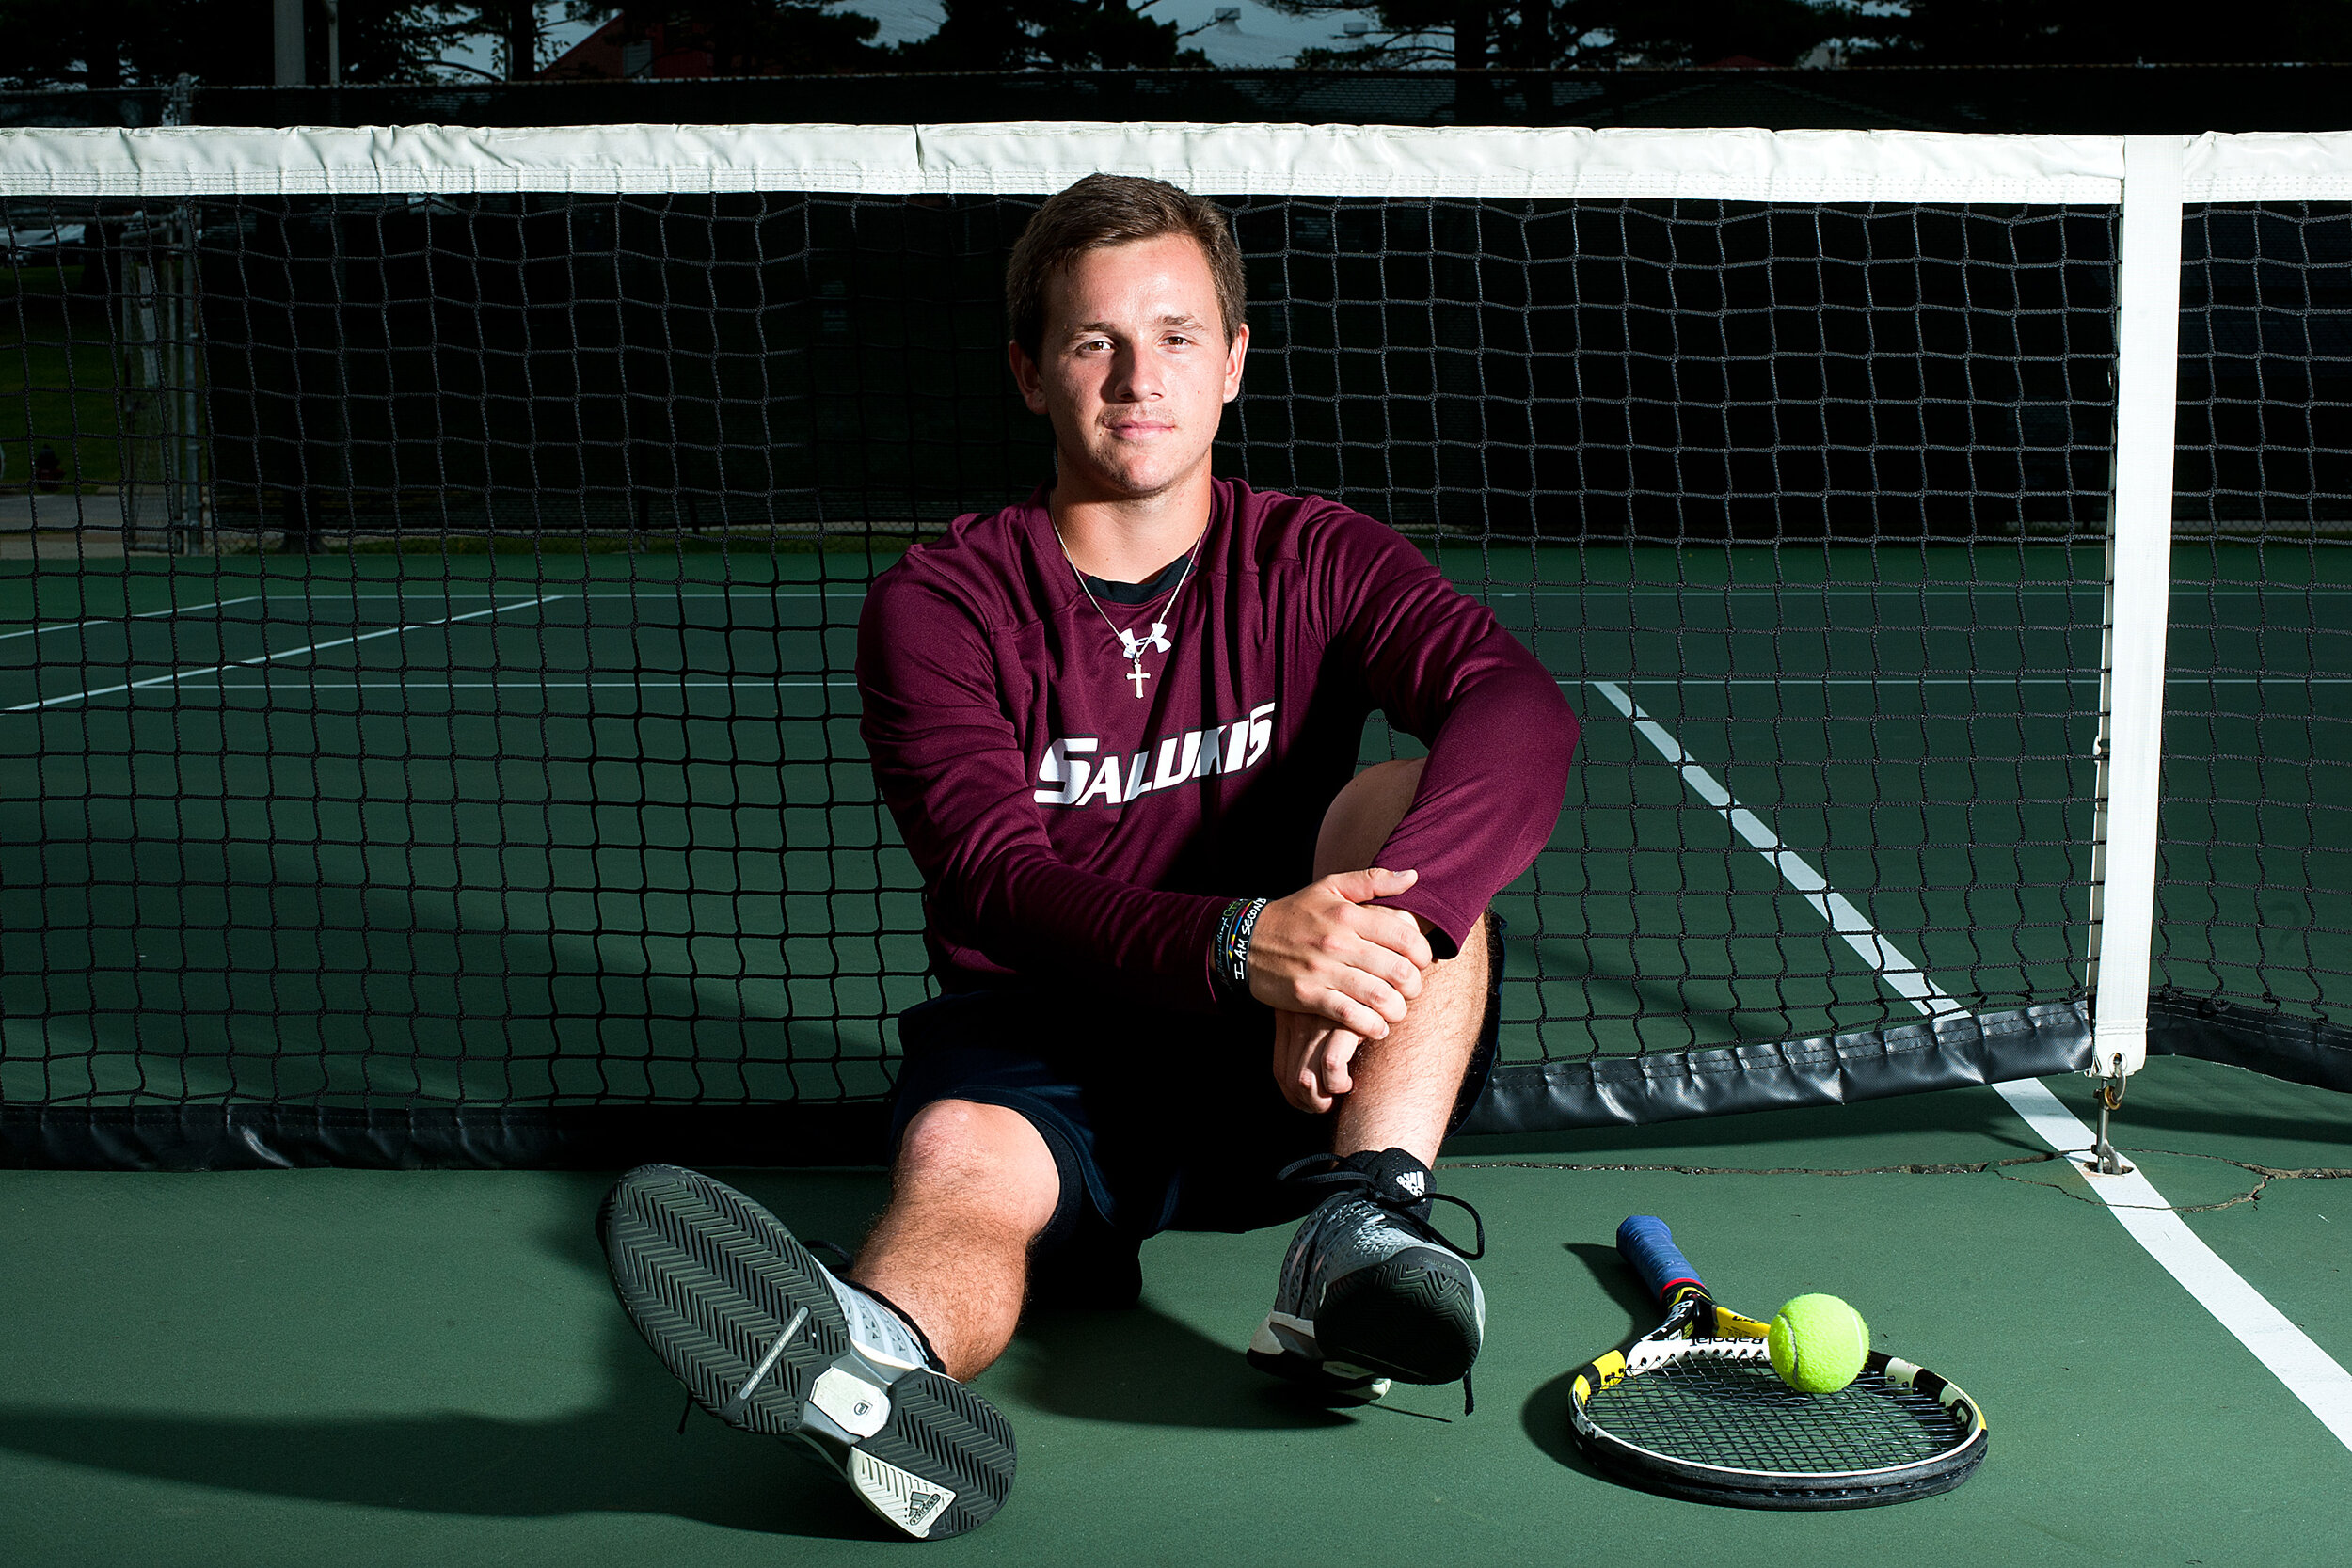  Daniel Martinez, of Enid, Oklahoma, was born in Quito, Ecuador, but moved to San Antonio when he was four years old to begin playing tennis. He is one of six freshmen on the Southern Illinois men’s tennis team in the 2014-15 season. 